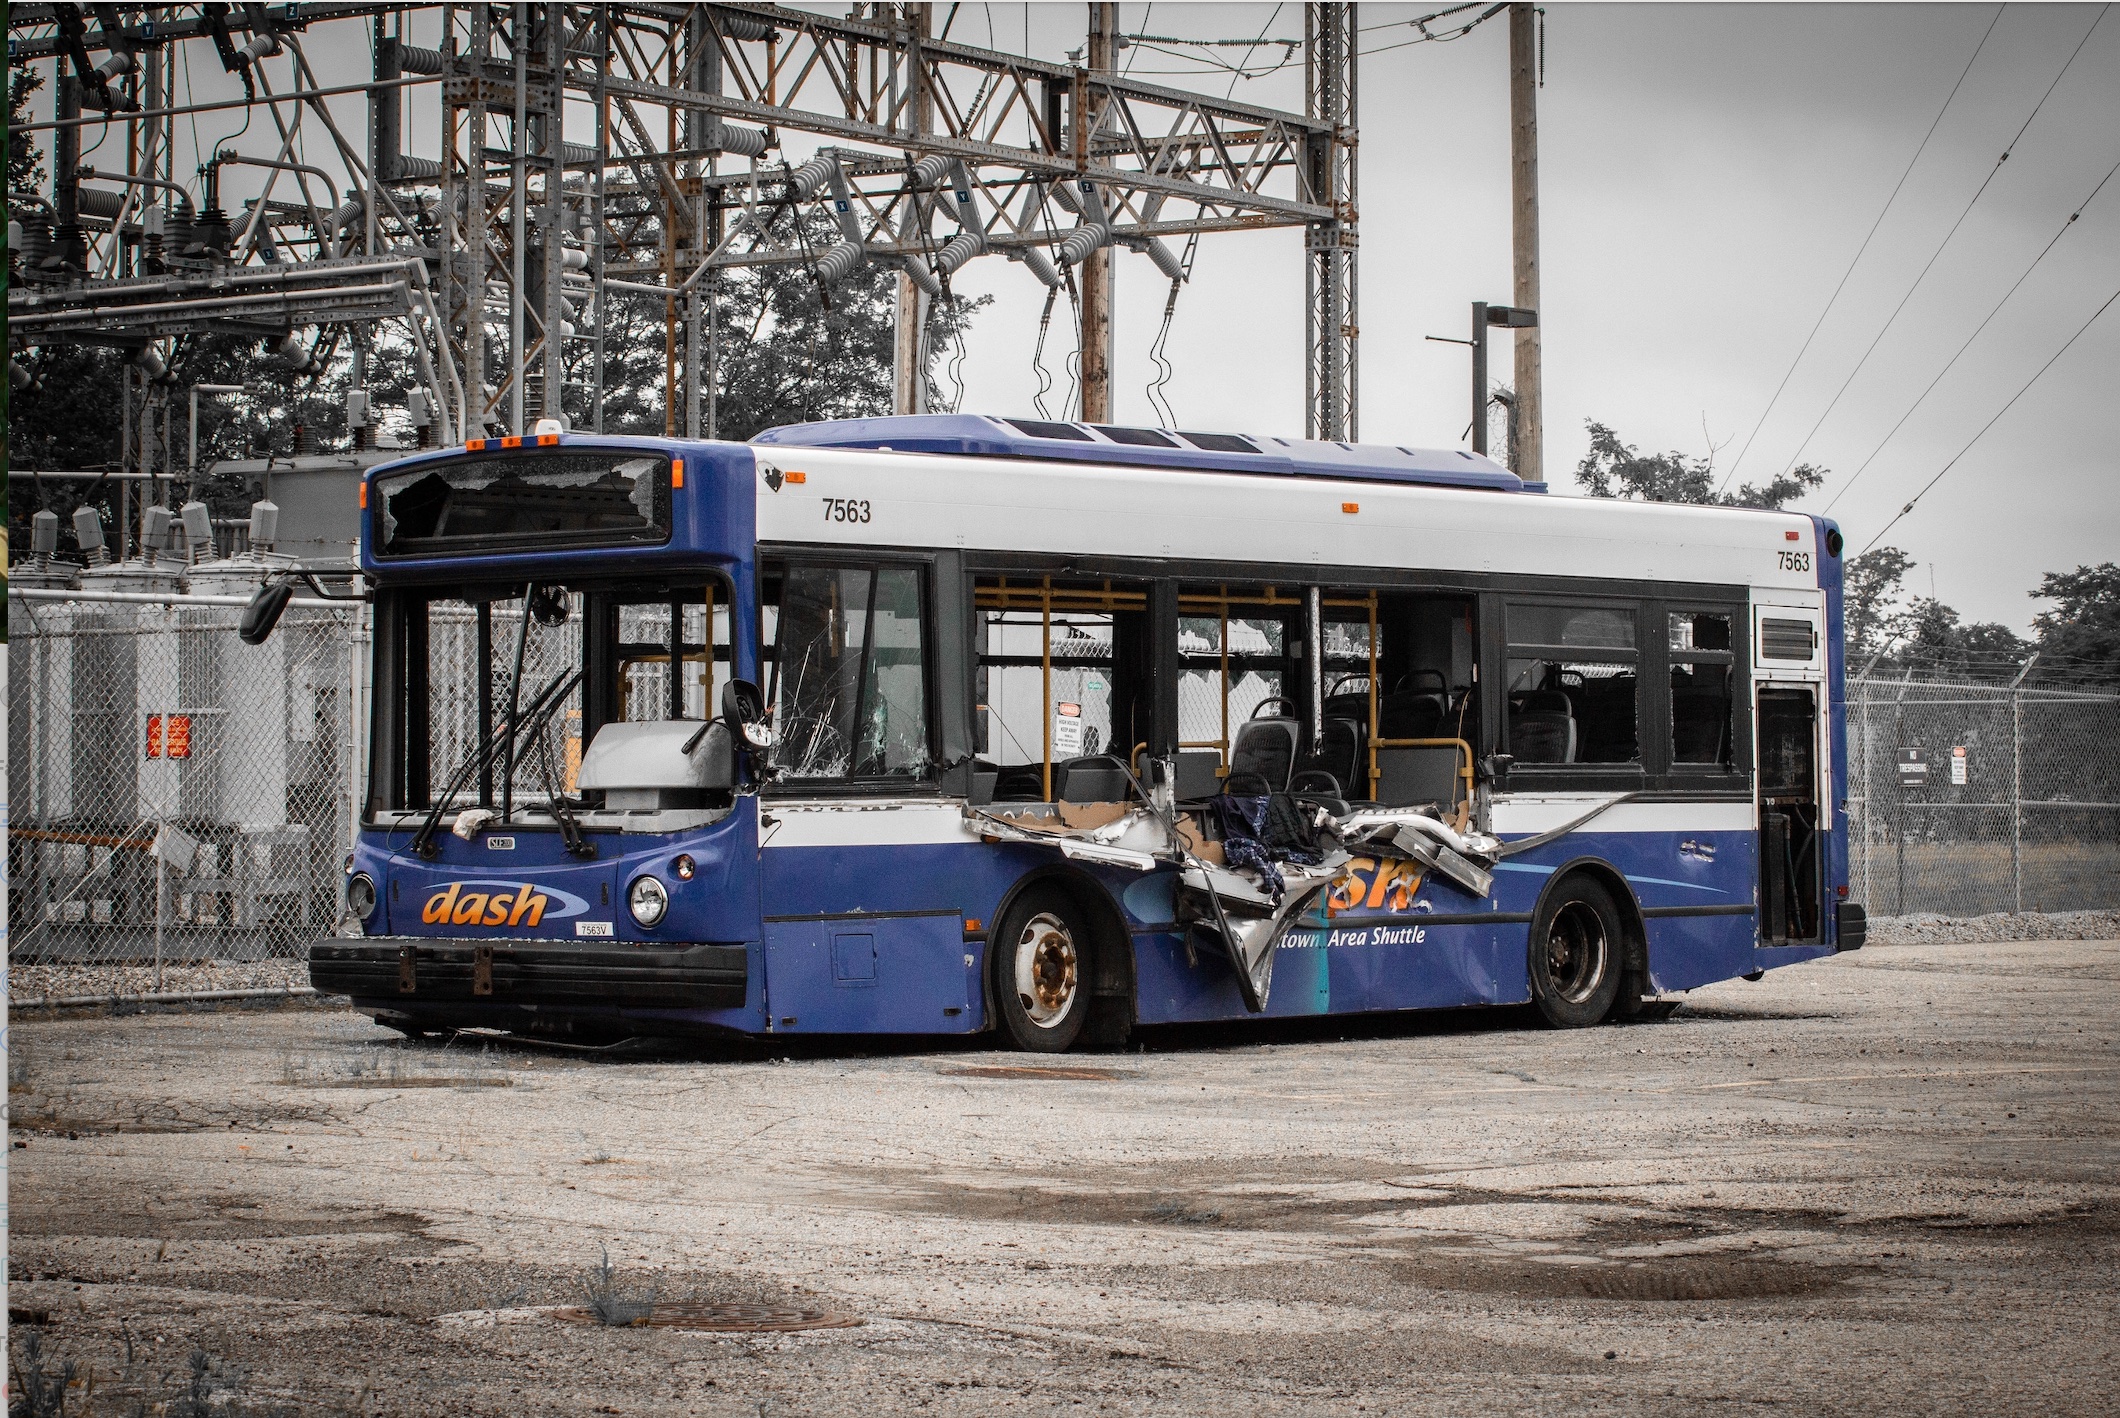 Blue and white bus post-accident with broken windows and damaged side; image by Jonathan Mast, via Unsplash.com.